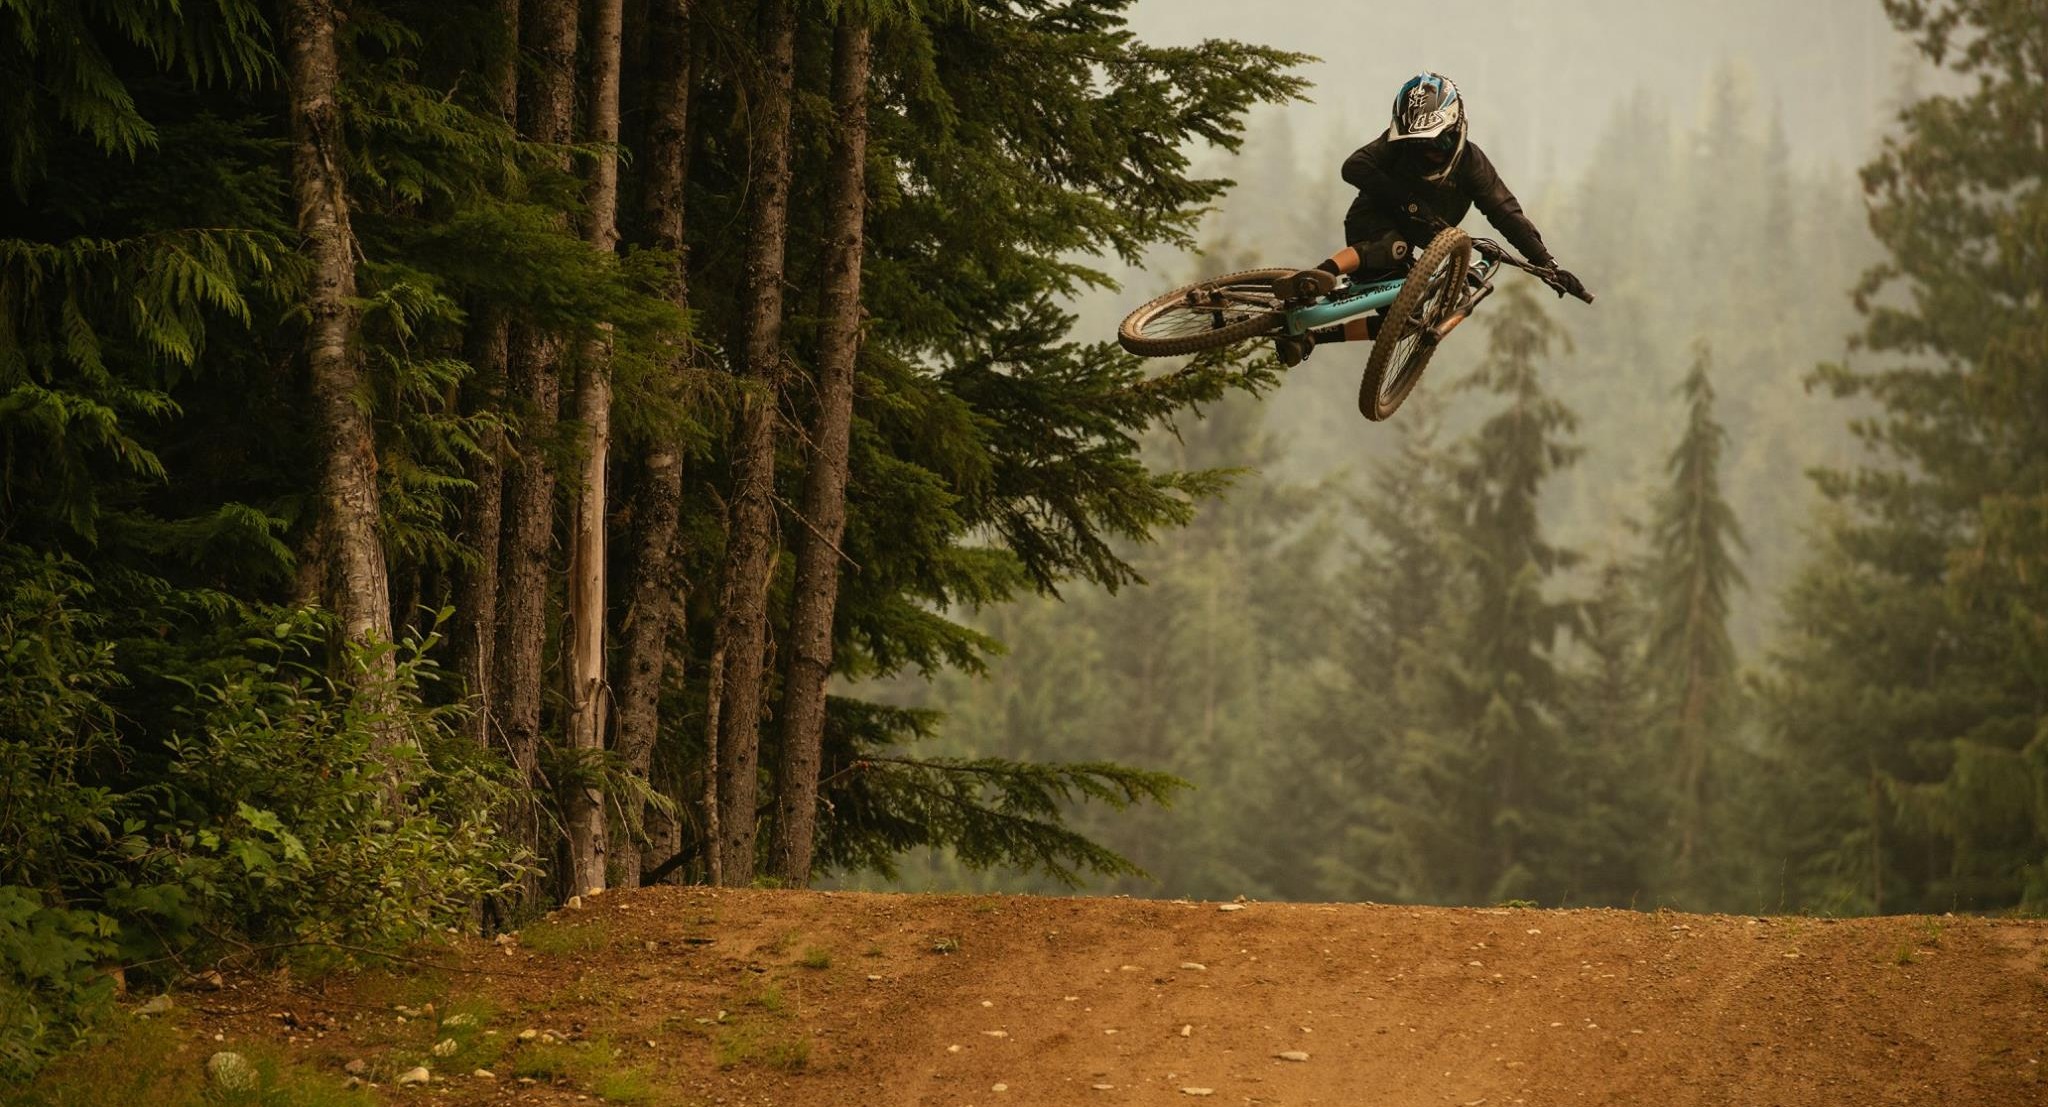 Put some air between you and ground with a Rocky Mountain mountain bike